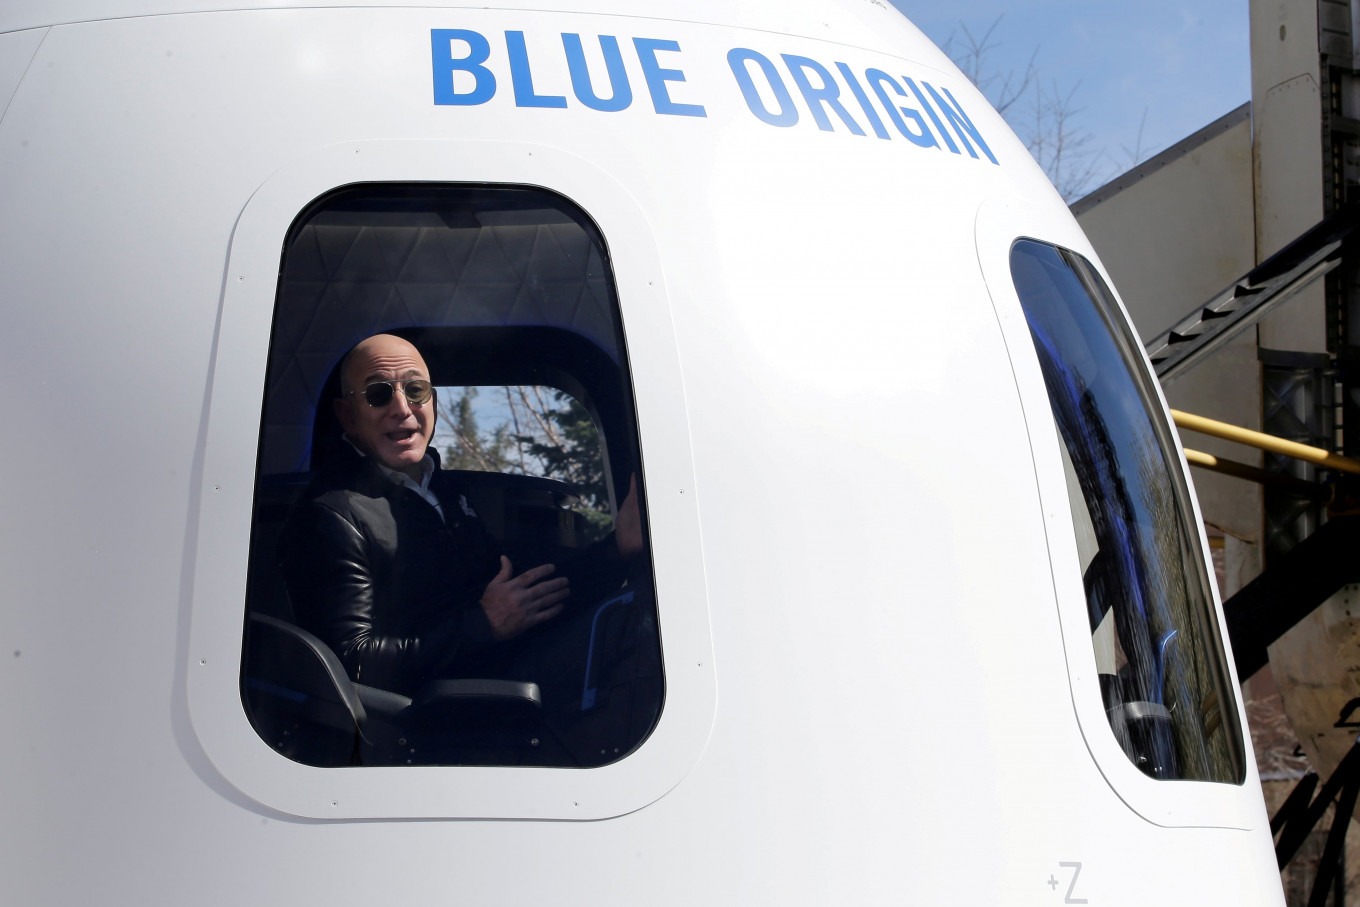 Amazon and Blue Origin founder Jeff Bezos addresses the media about the New Shepard rocket booster and Crew Capsule mockup at the 33rd Space Symposium in Colorado Springs, Colorado, United States April 5, 2017. (Reuters/Isaiah J. Downing/File Photo)